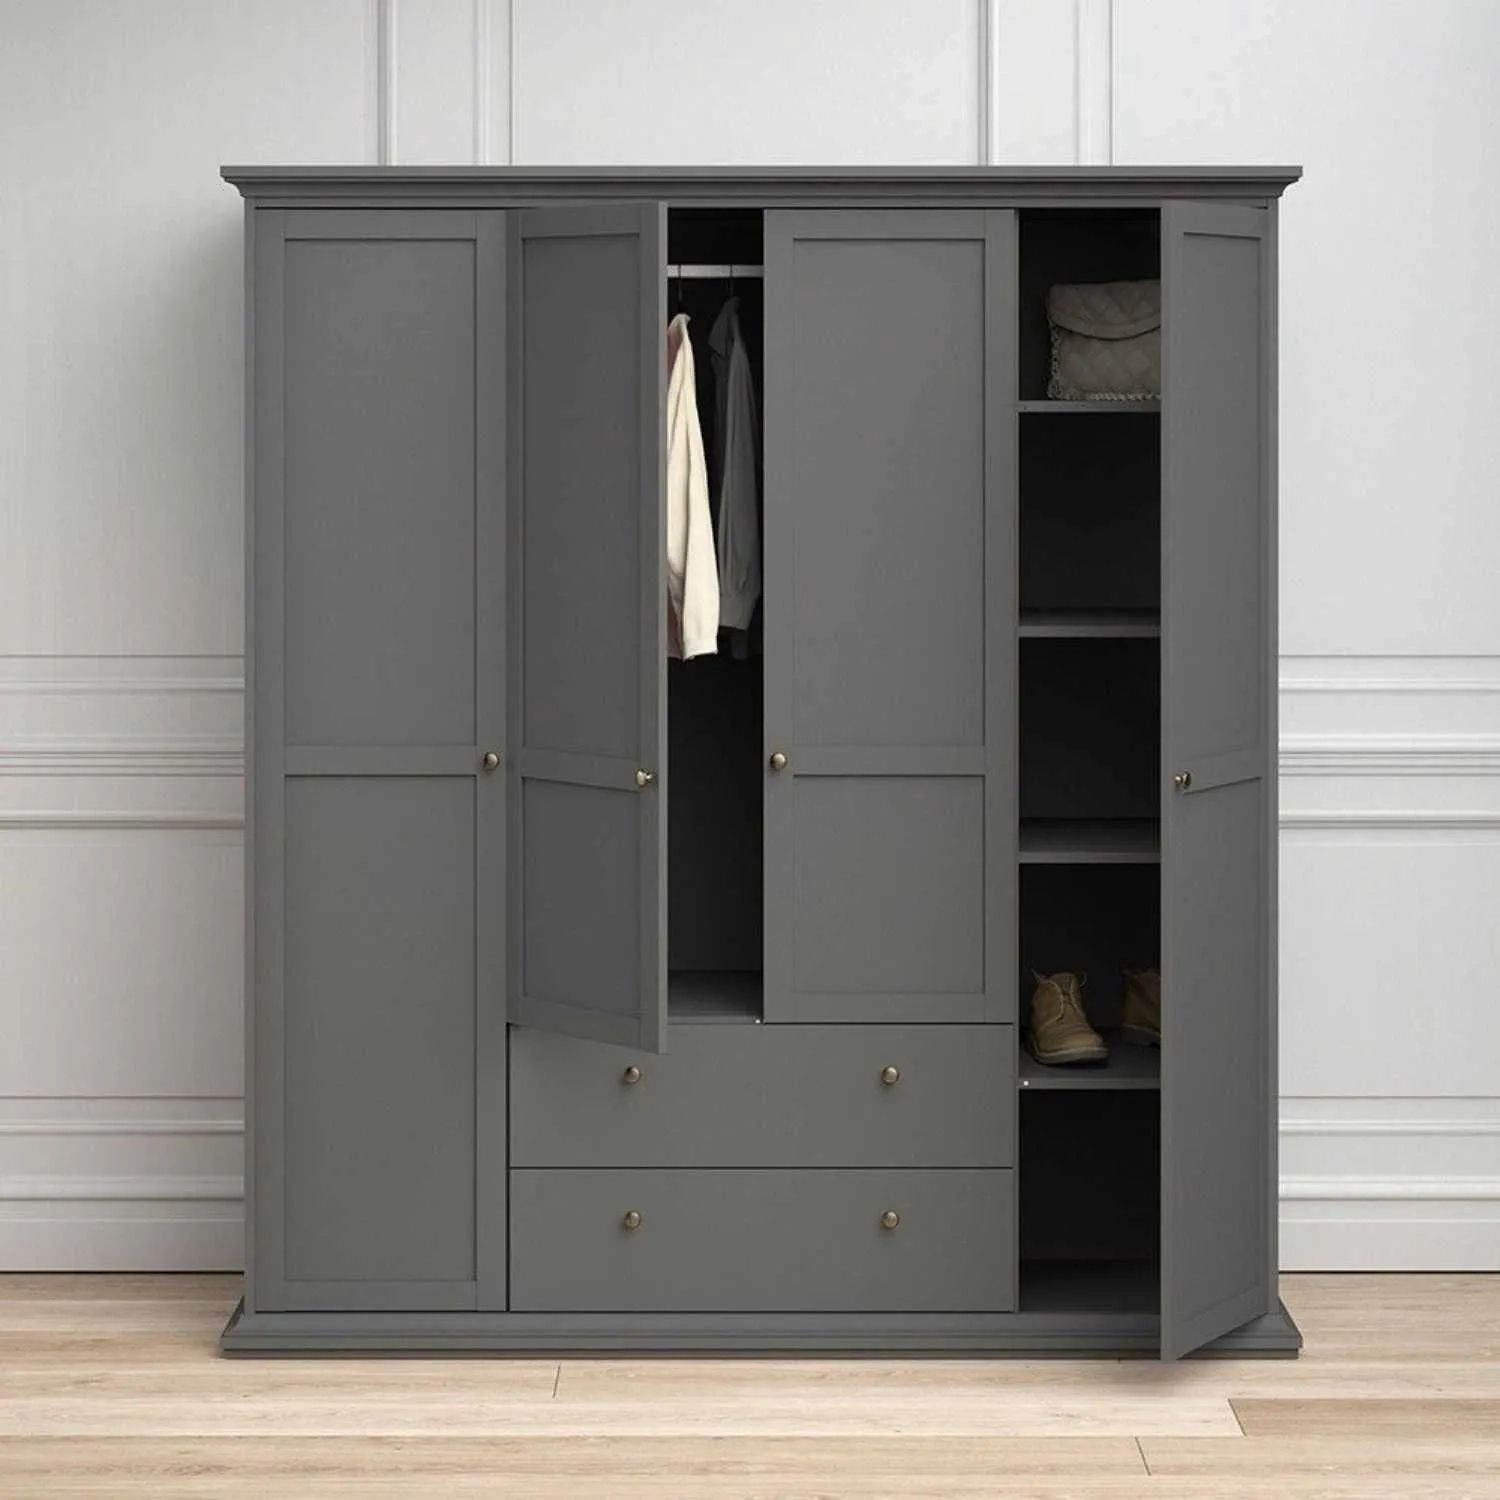 Matt Grey Painted Large 4 Door 2 Drawer Wardrobe With Shelves 200.6x181.4cm  – Home Living Inside Wardrobe With Shelves (Photo 12 of 15)